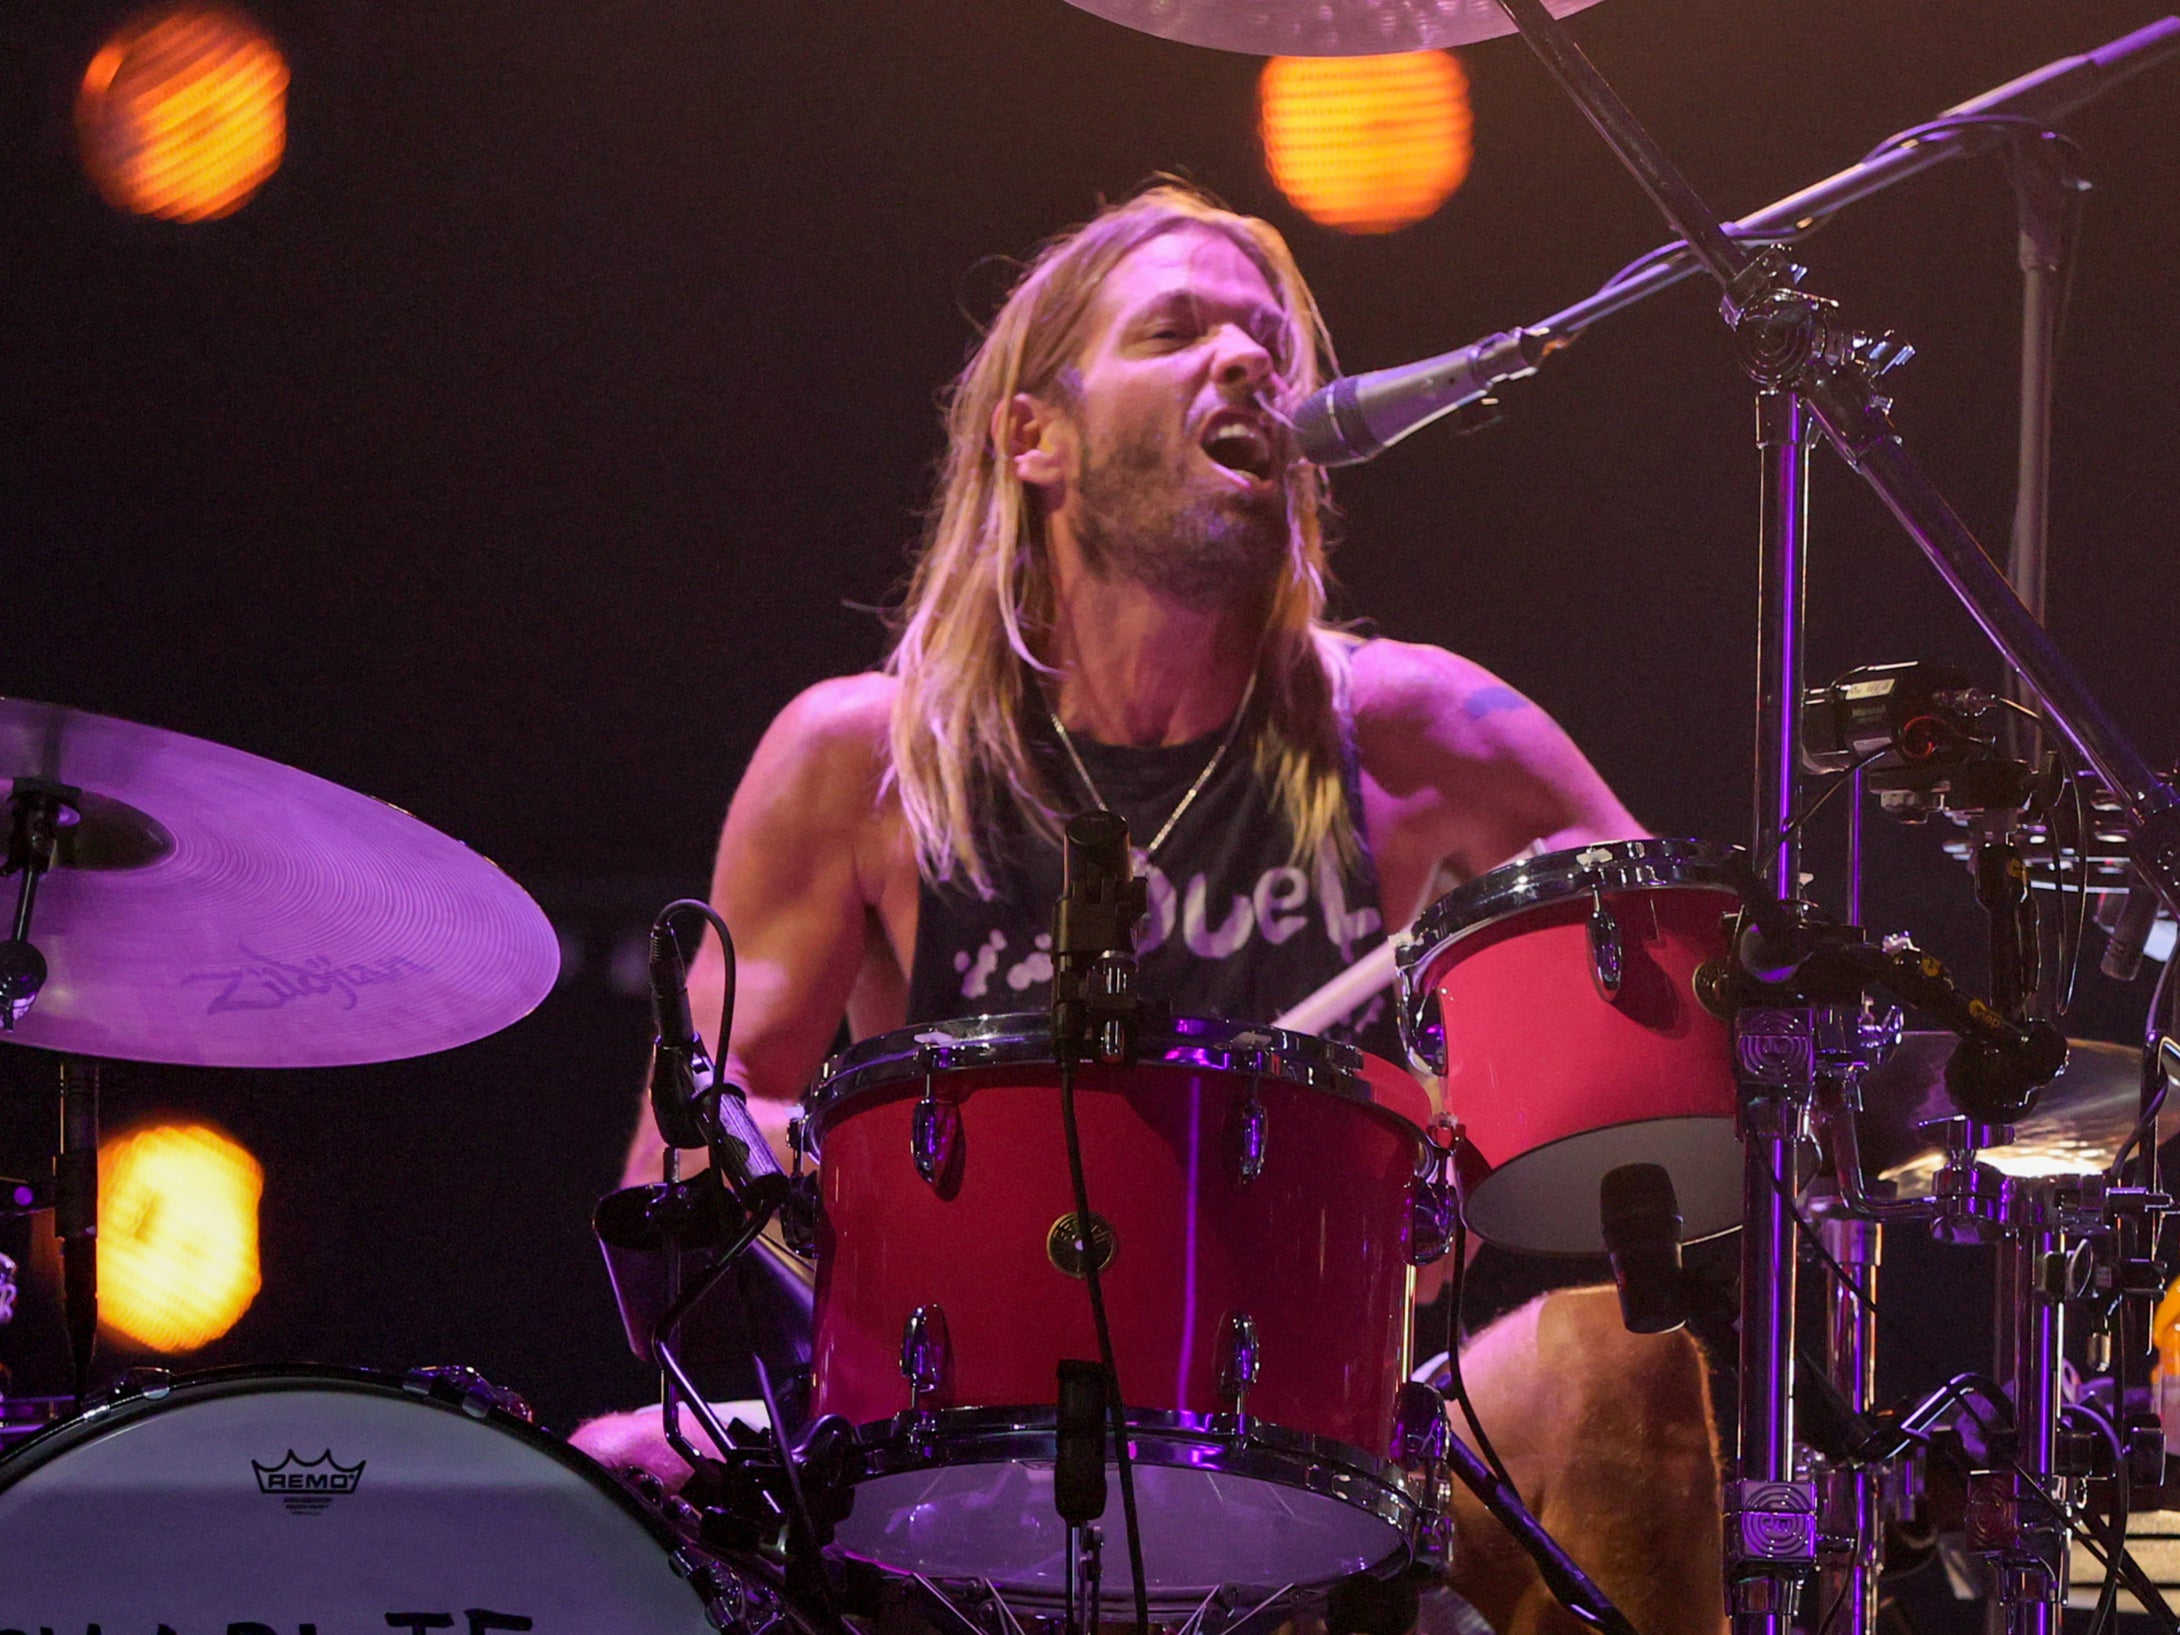 Taylor Hawkins performs onstage during the 2021 MTV Video Music Awards at Barclays Center on 12 September 2021 in the Brooklyn borough of New York City